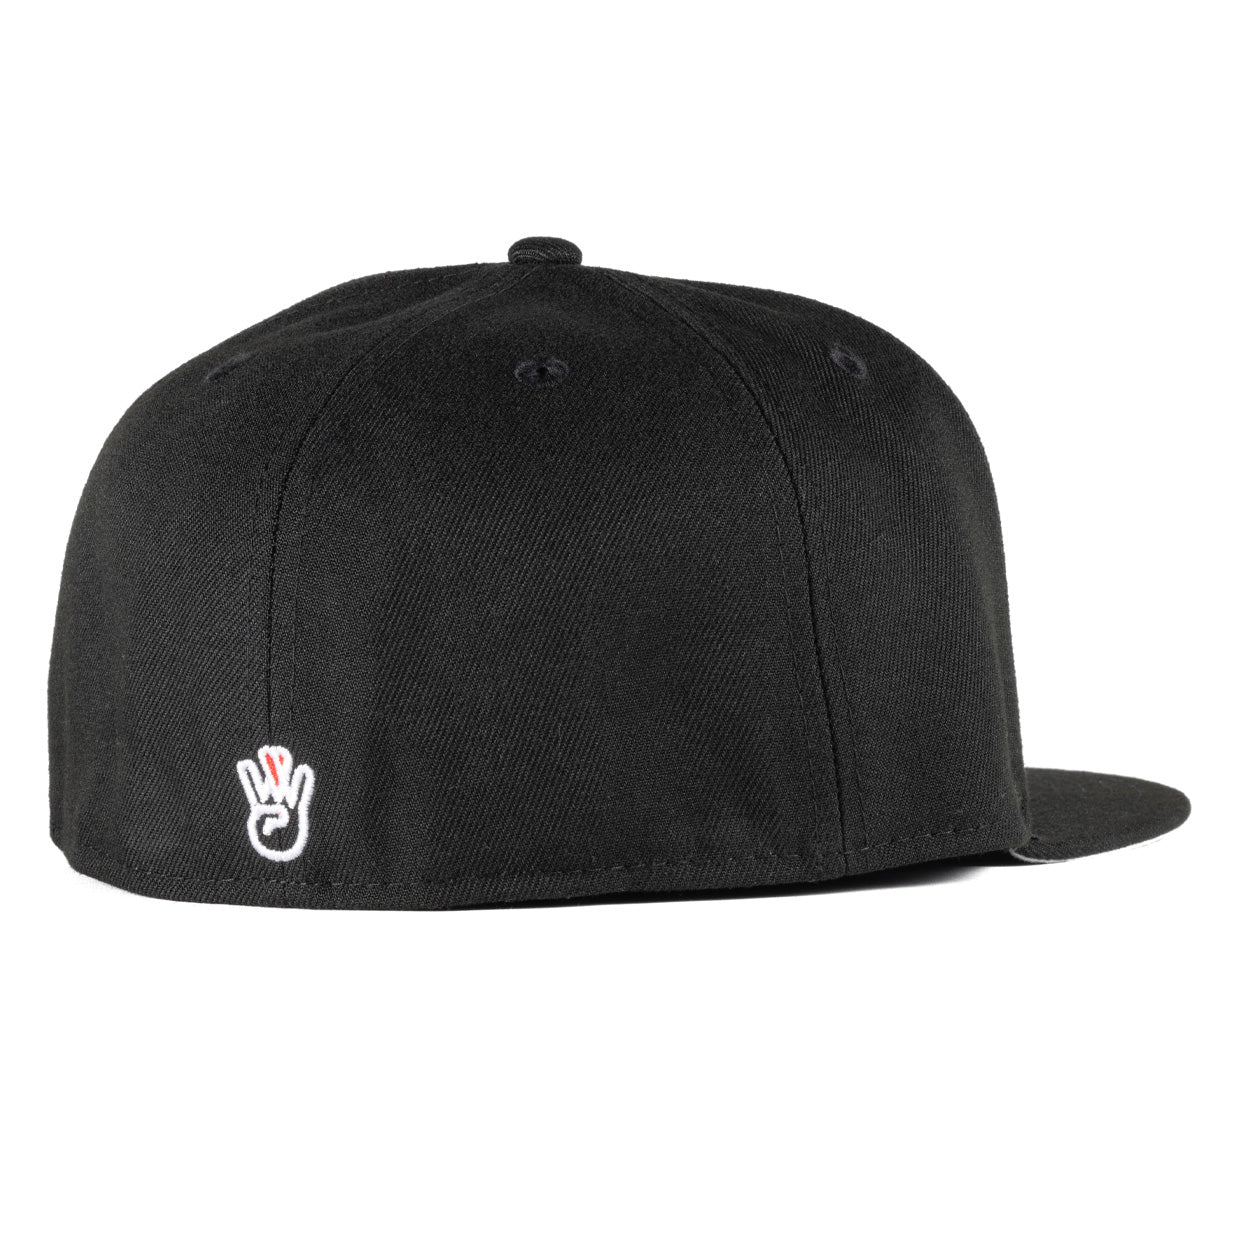 King of Hearts New Era Fitted